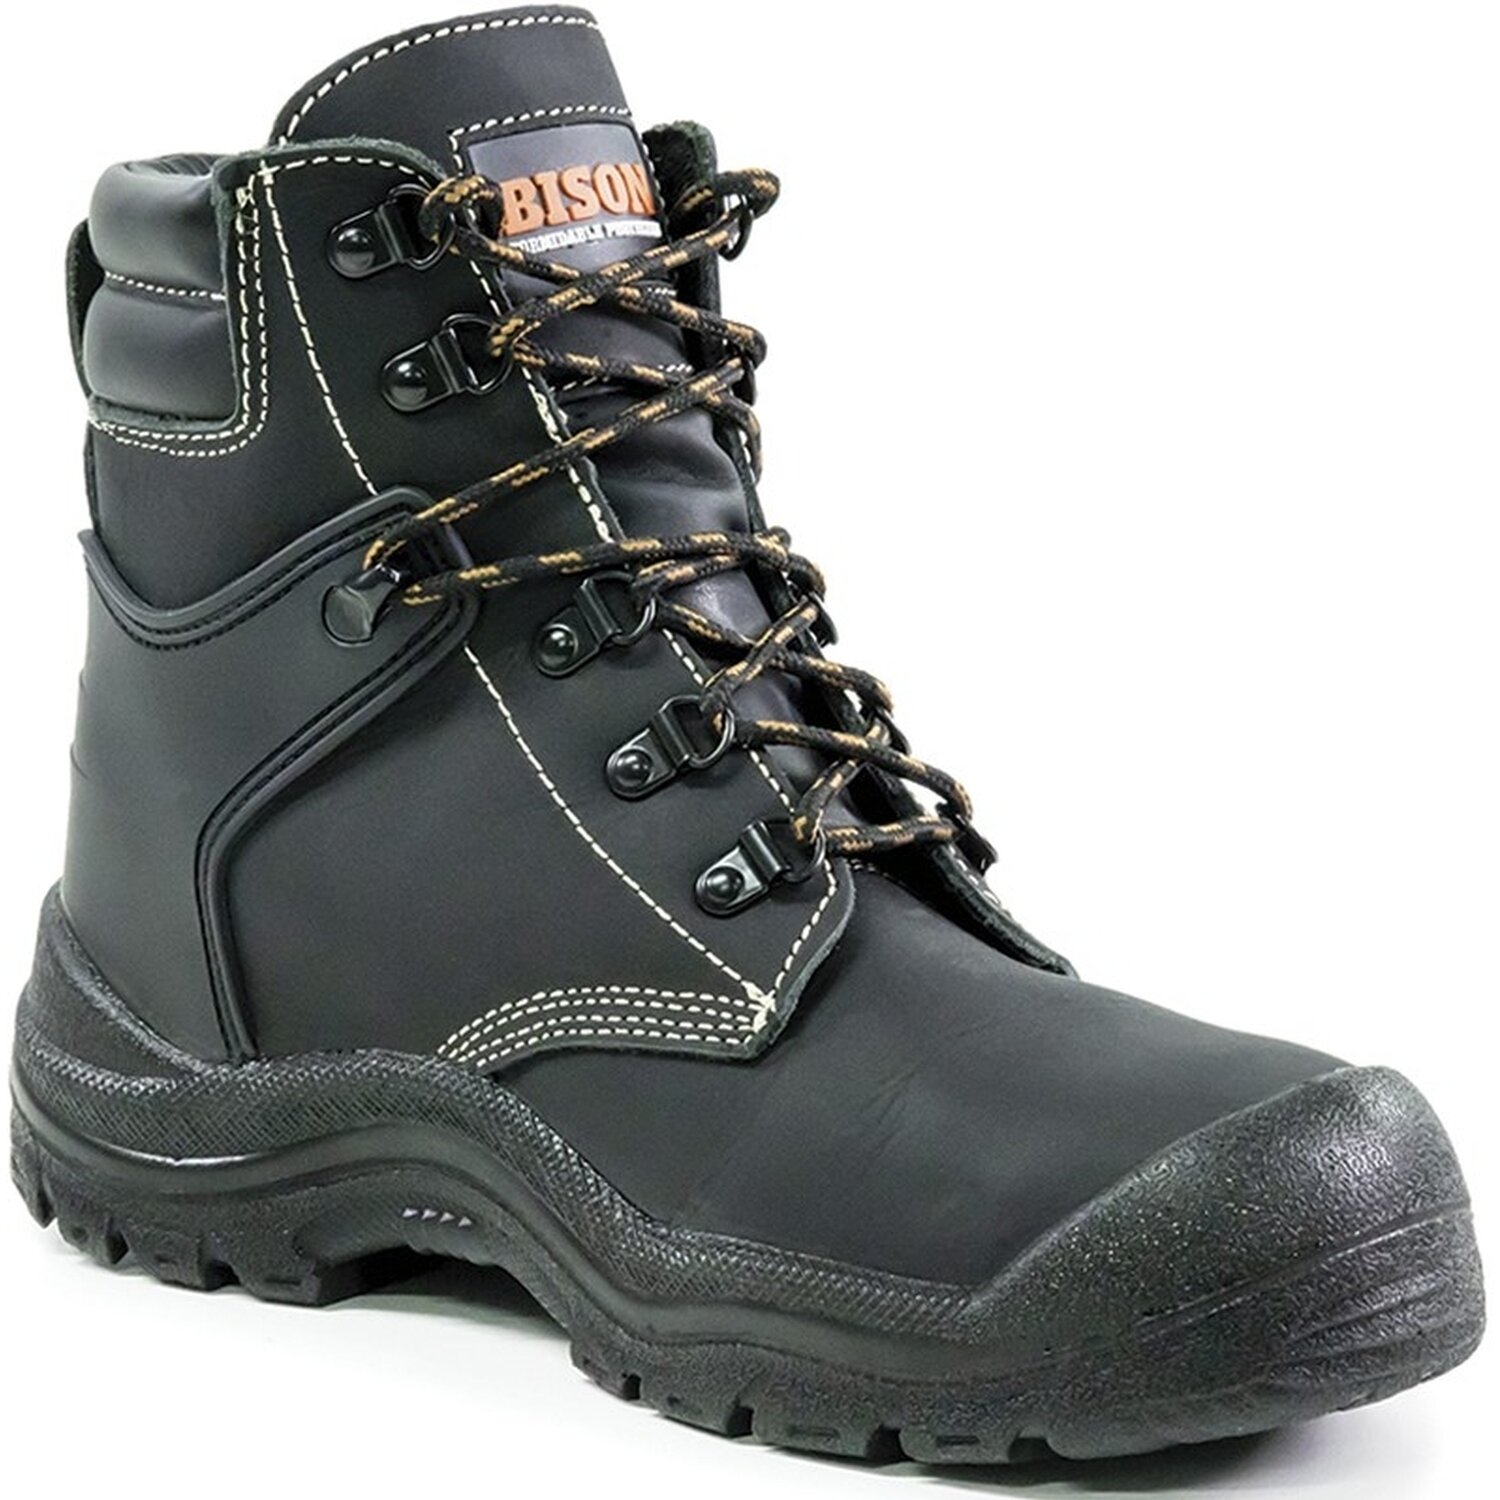 Bison Wolf Steel Toe Lace Up Safety Boot c/w Scuff Cap Black ...